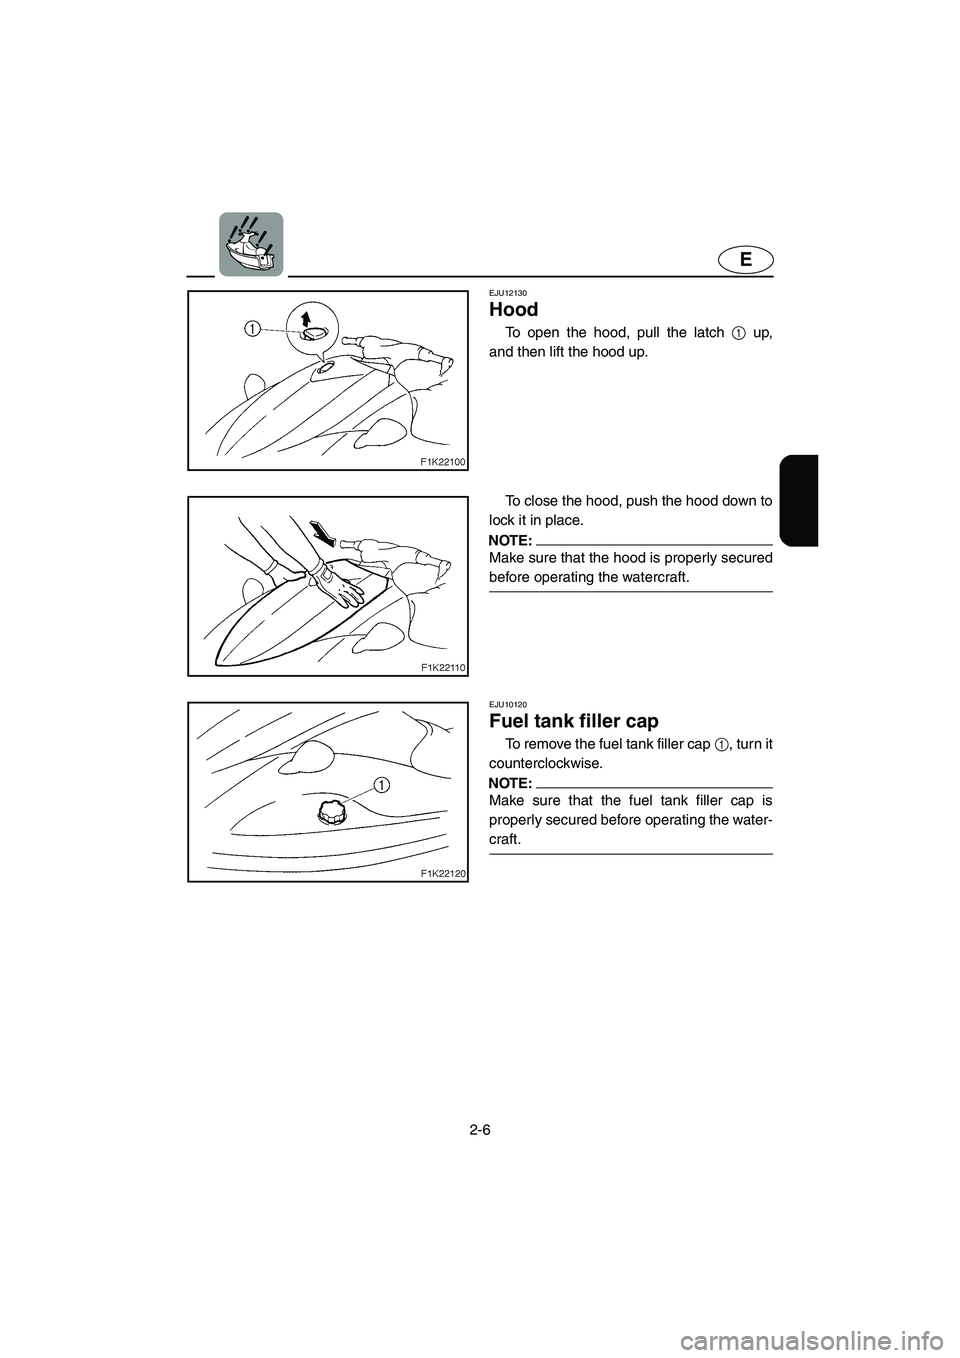 YAMAHA VX CRUISER 2005  Owners Manual 2-6
E
EJU12130 
Hood  
To open the hood, pull the latch 1 up,
and then lift the hood up. 
To close the hood, push the hood down to
lock it in place. 
NOTE:@ Make sure that the hood is properly secured